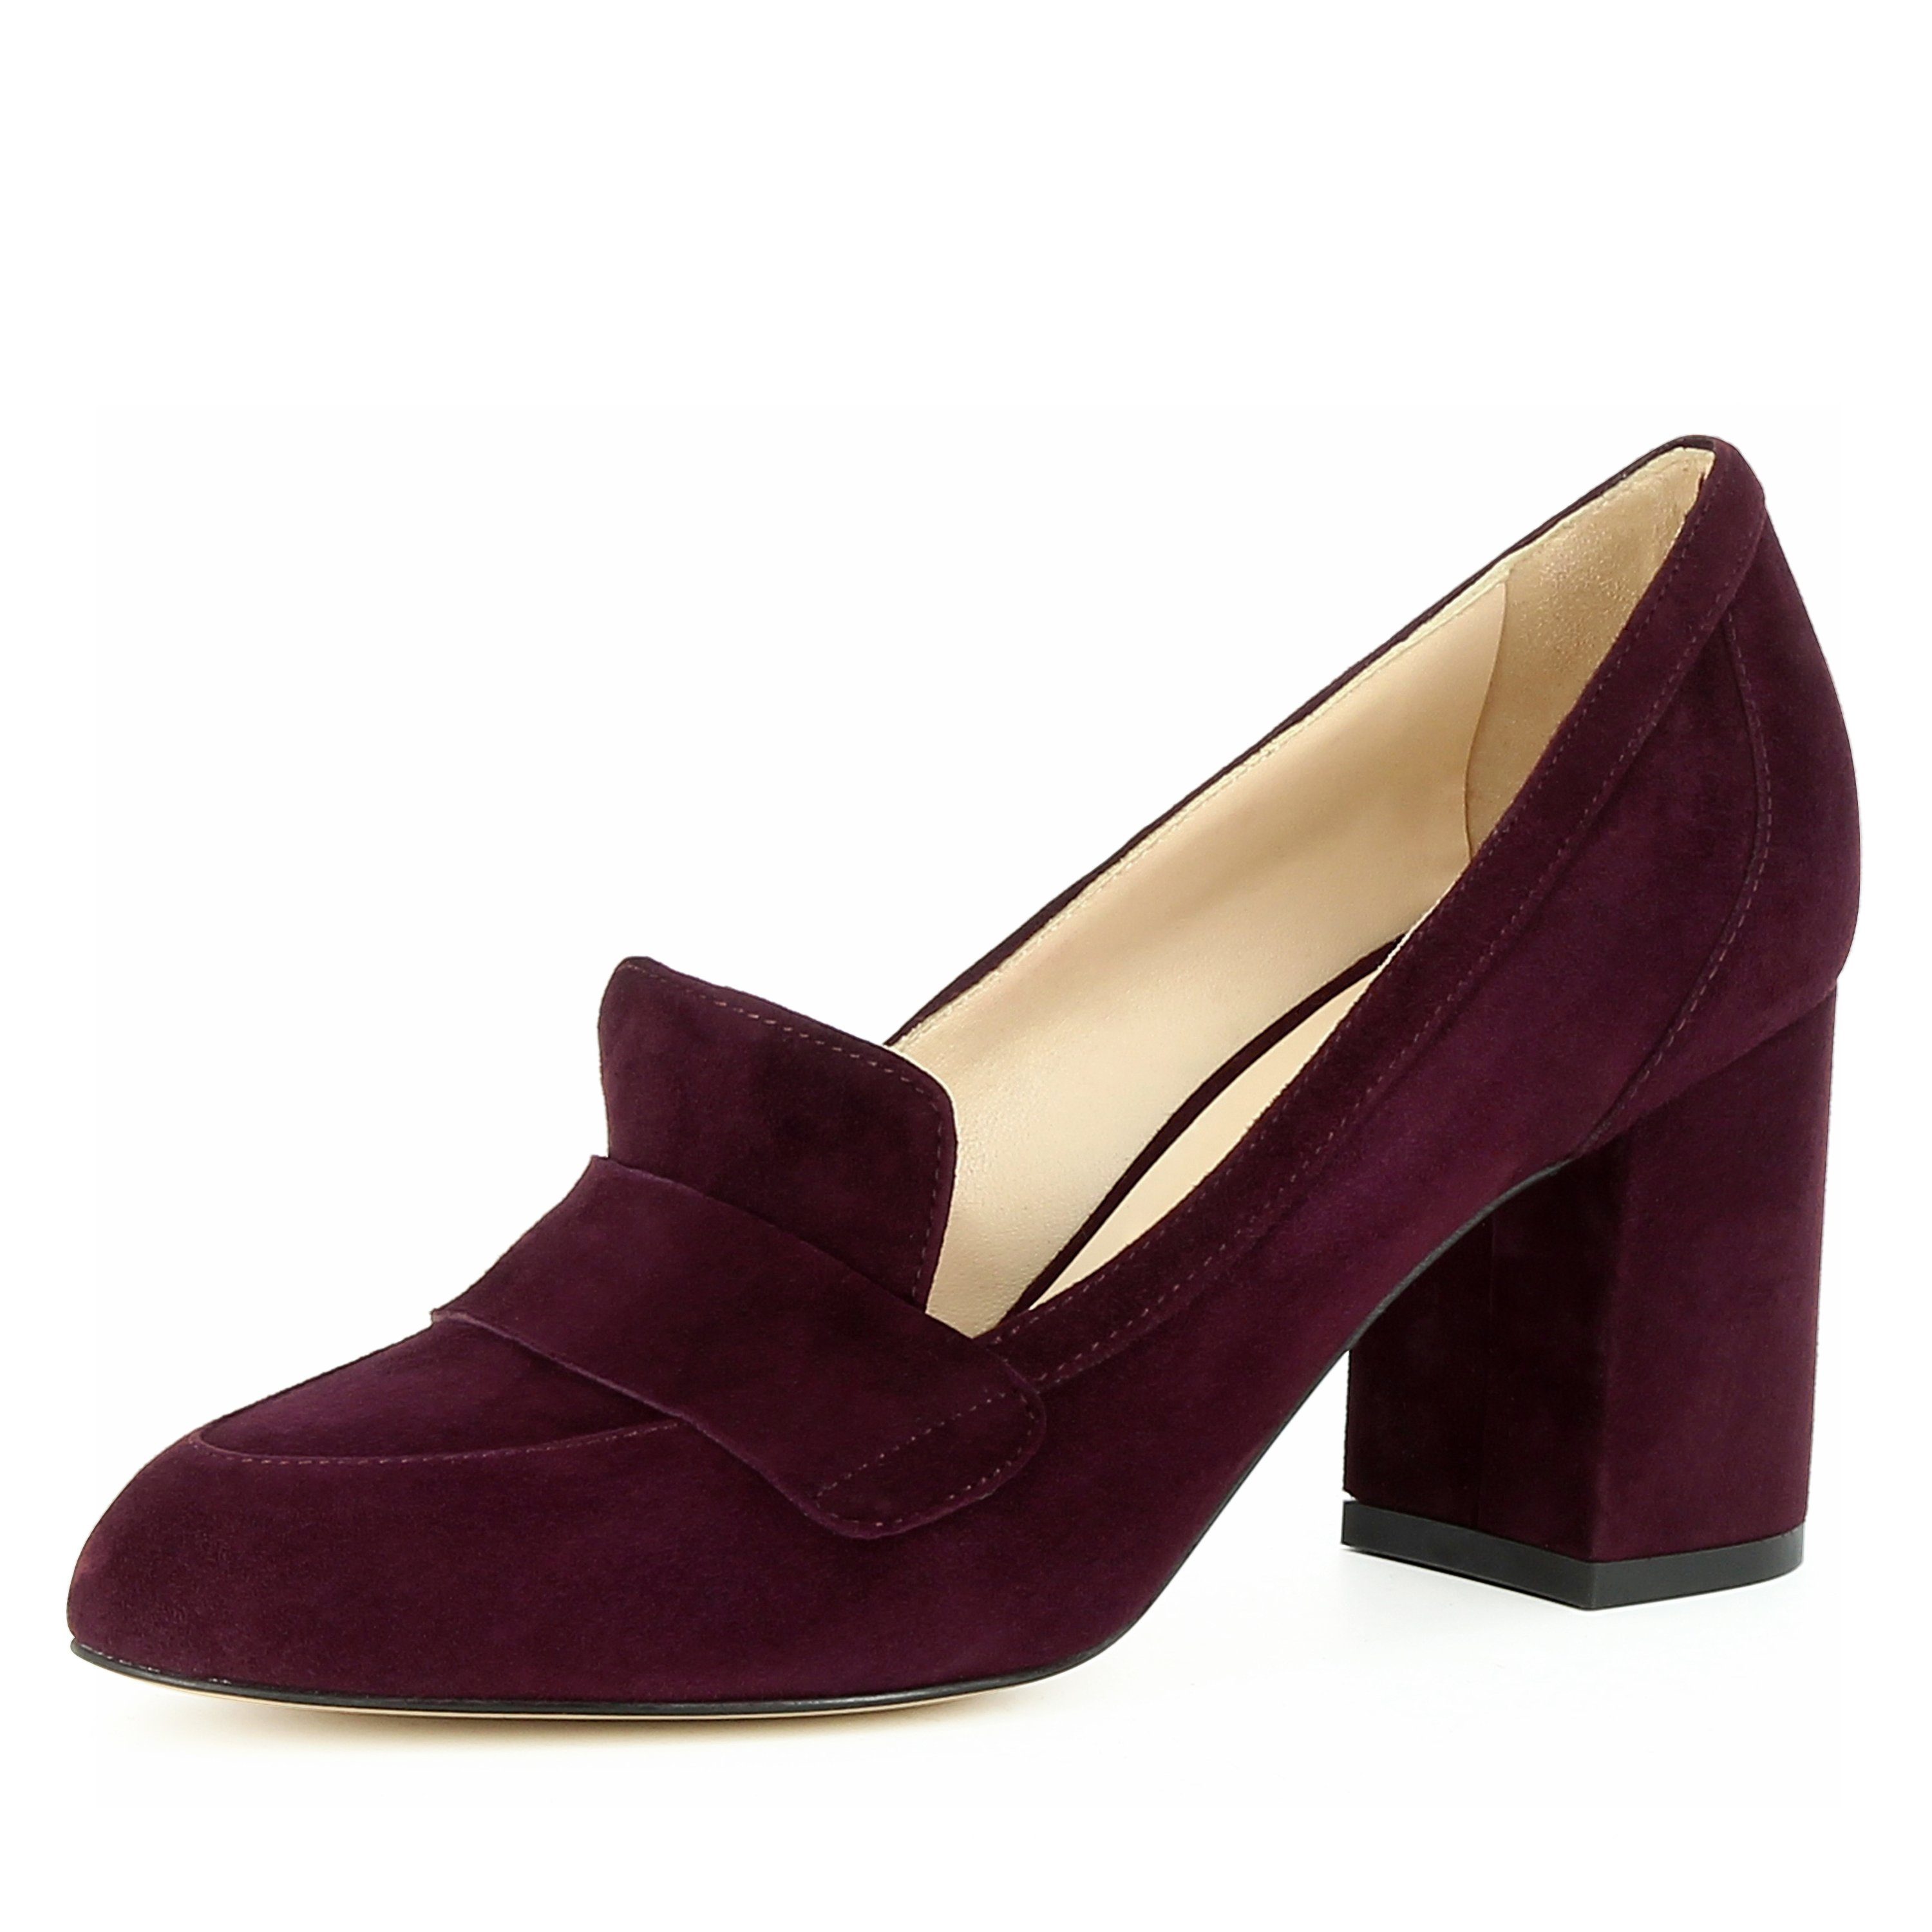 Evita NELLY Pumps Handmade in Italy bordeaux